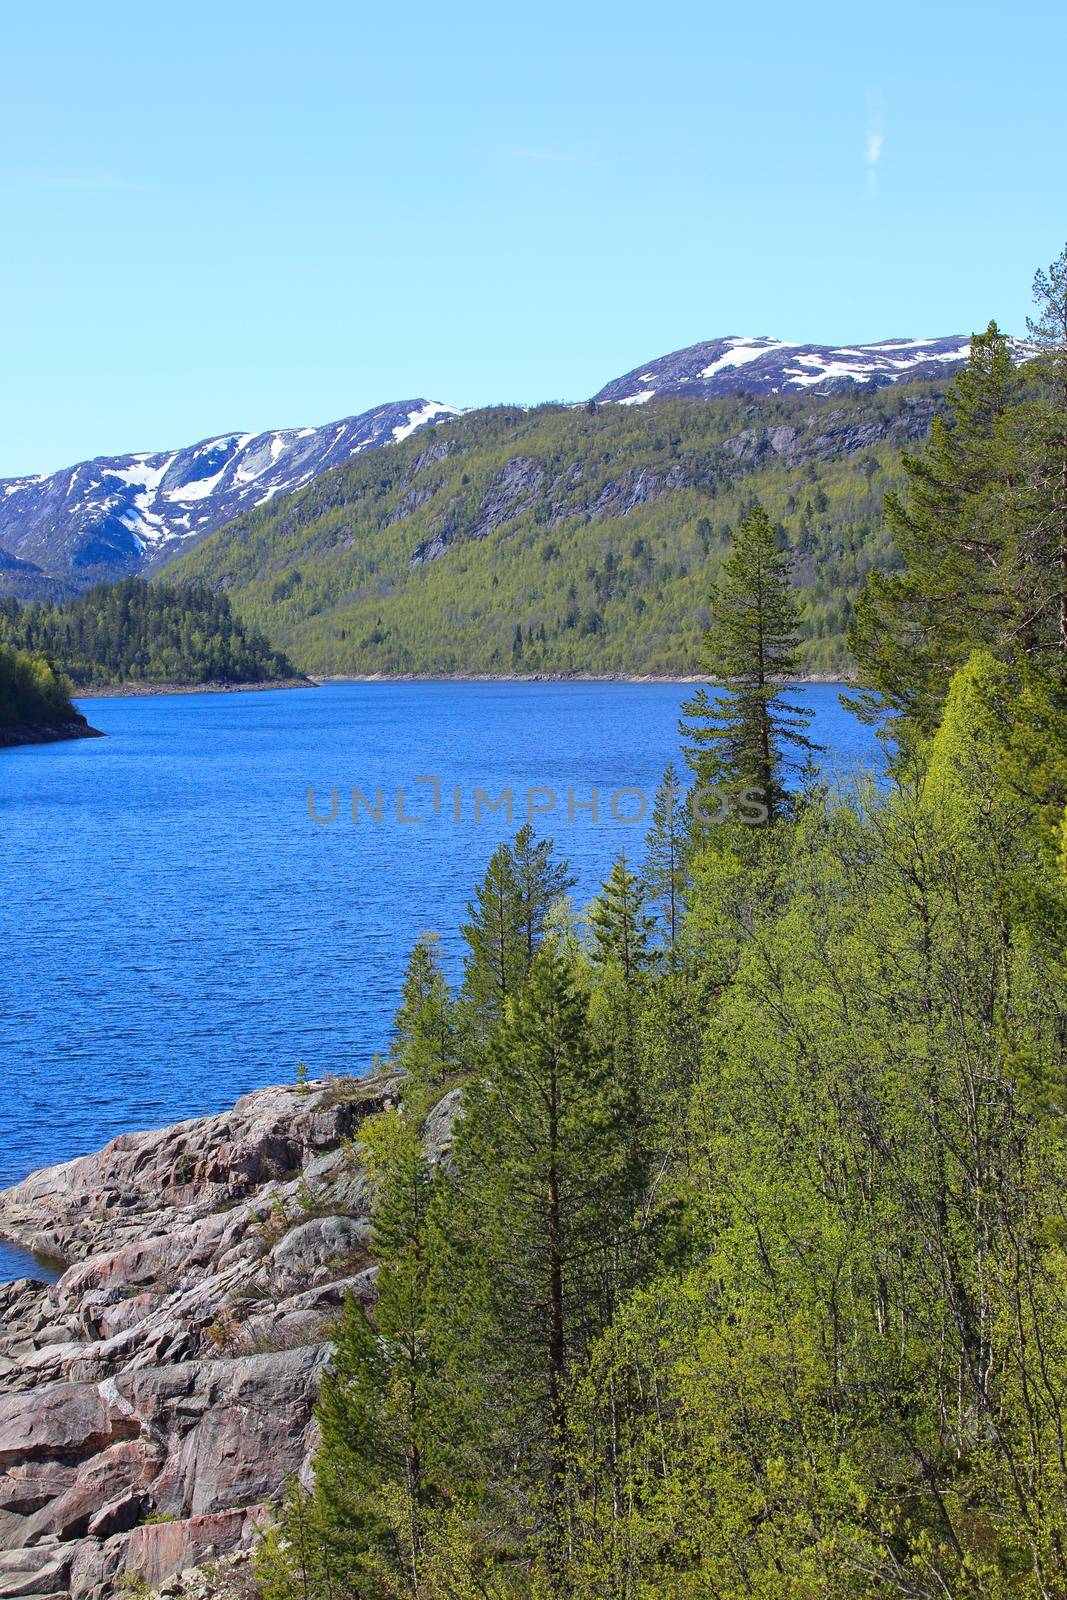 Summer Norway landscape with forest mountains and fjord